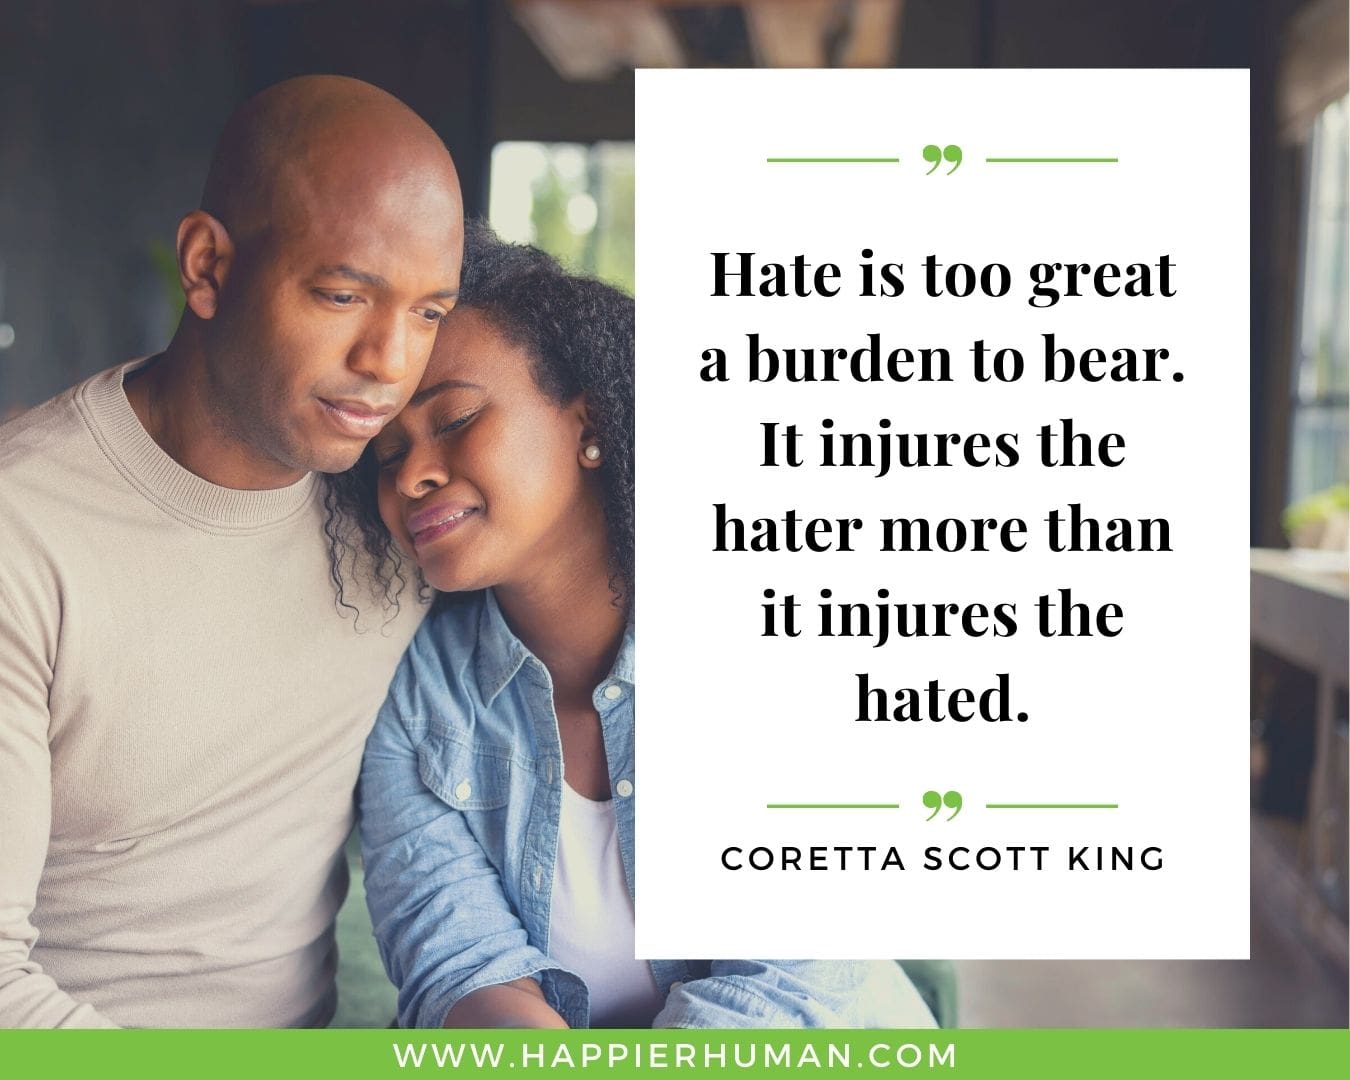 Haters Quotes - “Hate is too great a burden to bear. It injures the hater more than it injures the hated.” - Coretta Scott King